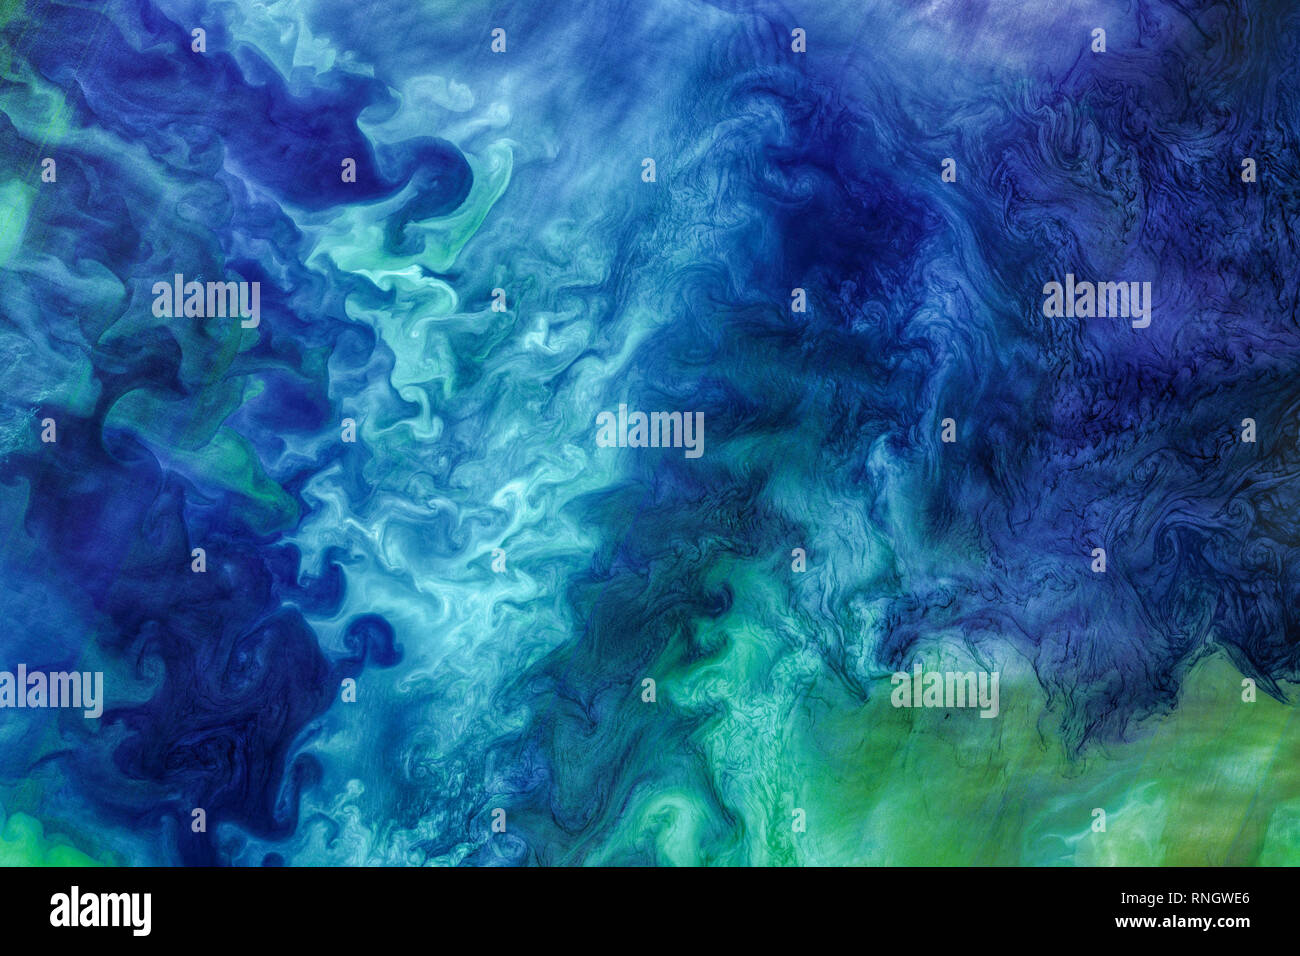 Alaskan coast usually come alive each spring with blooms of phytoplankton. These blooms can form striking patterns of blue and green seawater, such as Stock Photo